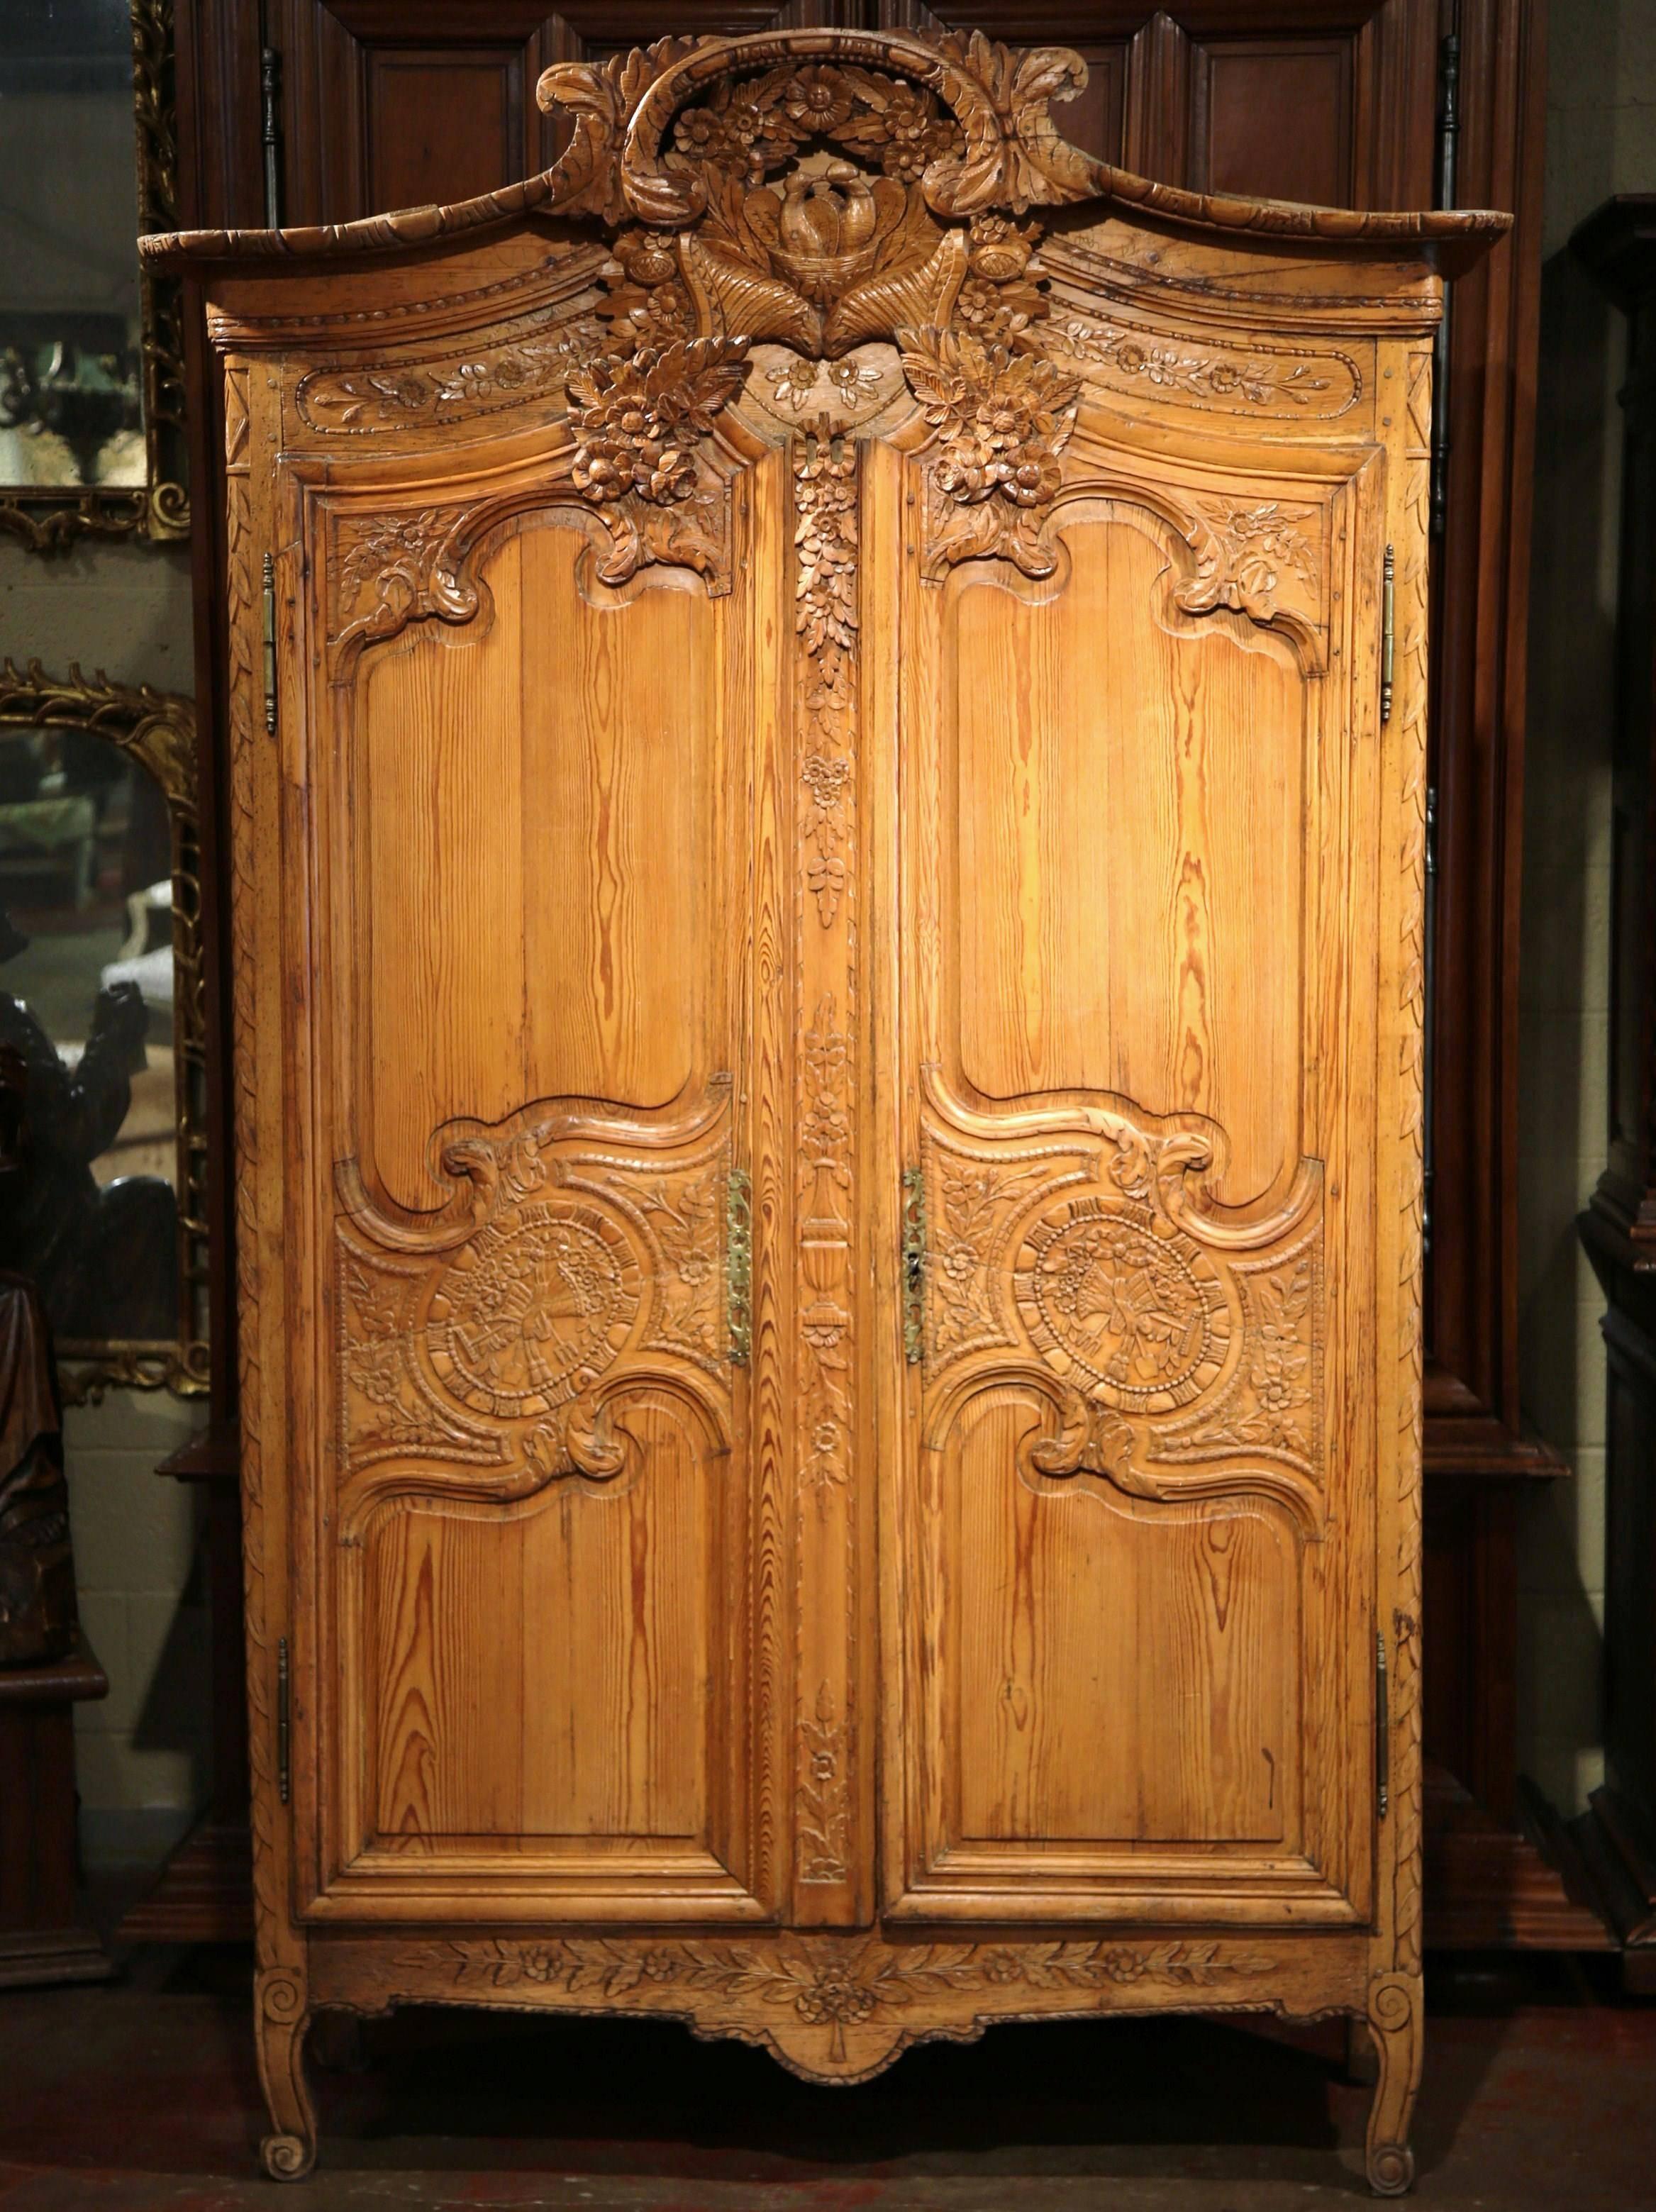 This elegant, antique armoire was crafted in Normandy, France, circa 1760. The pine cabinet with bonnet top and scroll feet, features all the elements of a traditional wedding armoire. (In the past, a wedding armoire was a gift to the bride from the